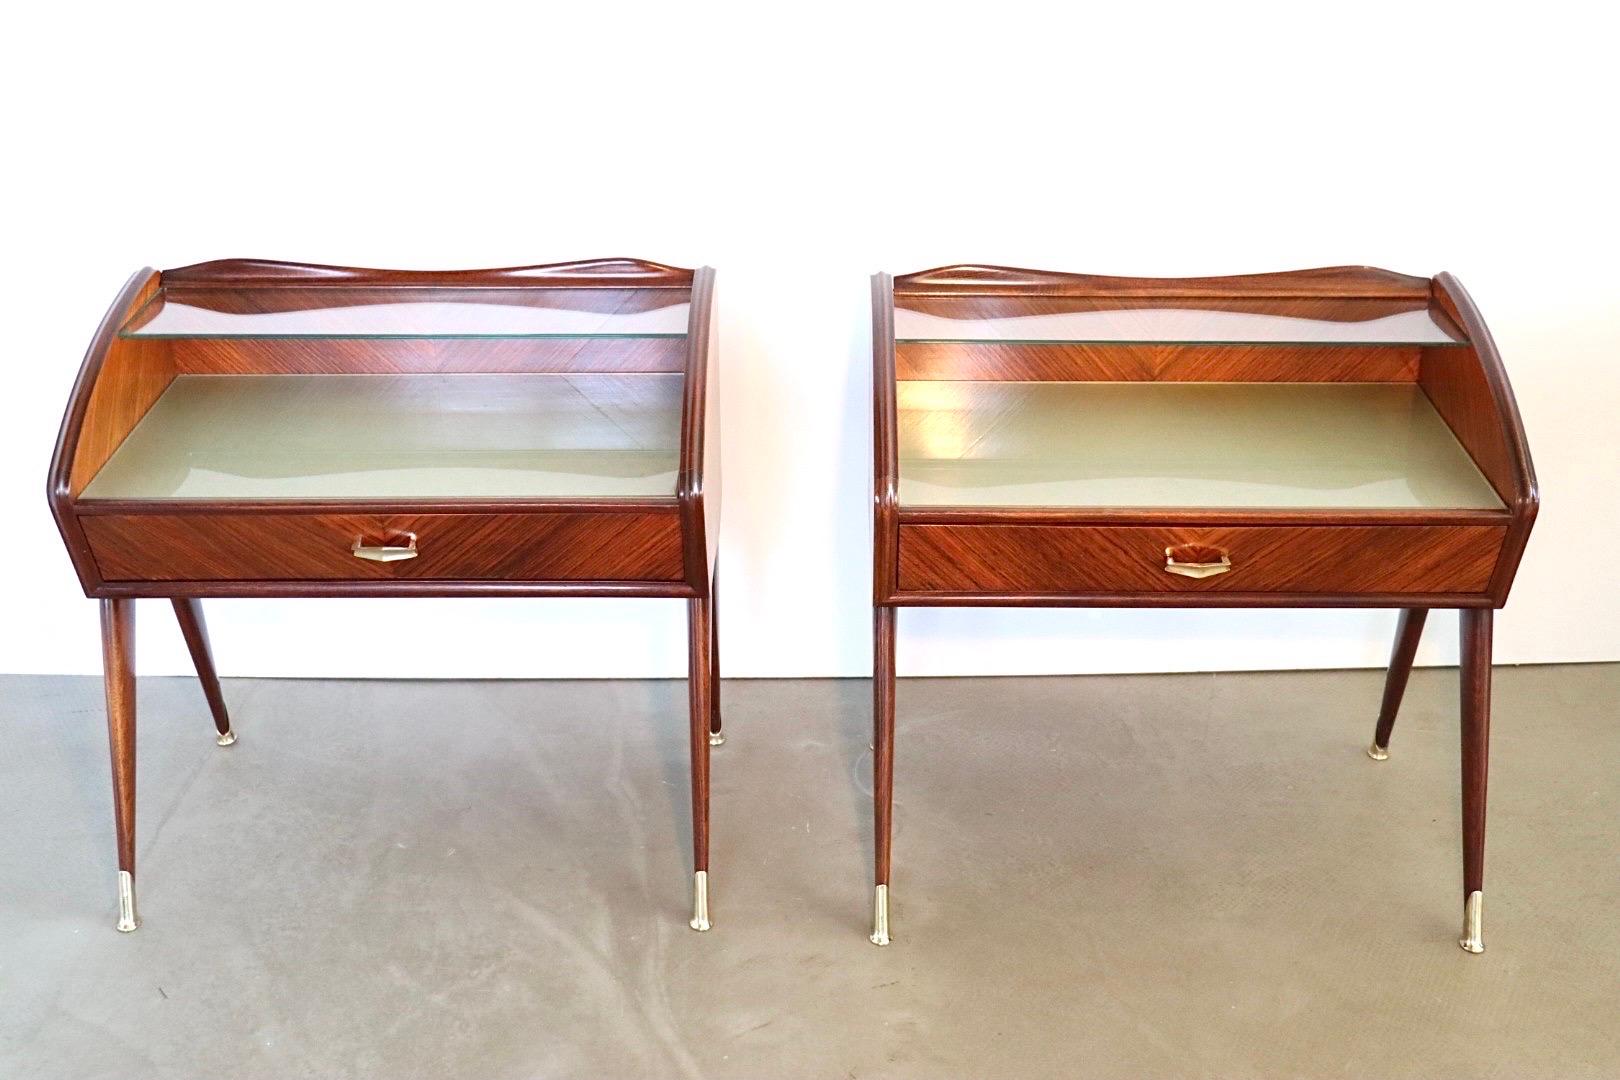 Remarkable and rare set of 2 night stands or bed side tables by Italian designer Paolo Buffa. The tables feature a floating glass shelf on top, a glass covered table top with a beautifully patterned green / silverish finish underneath the glass